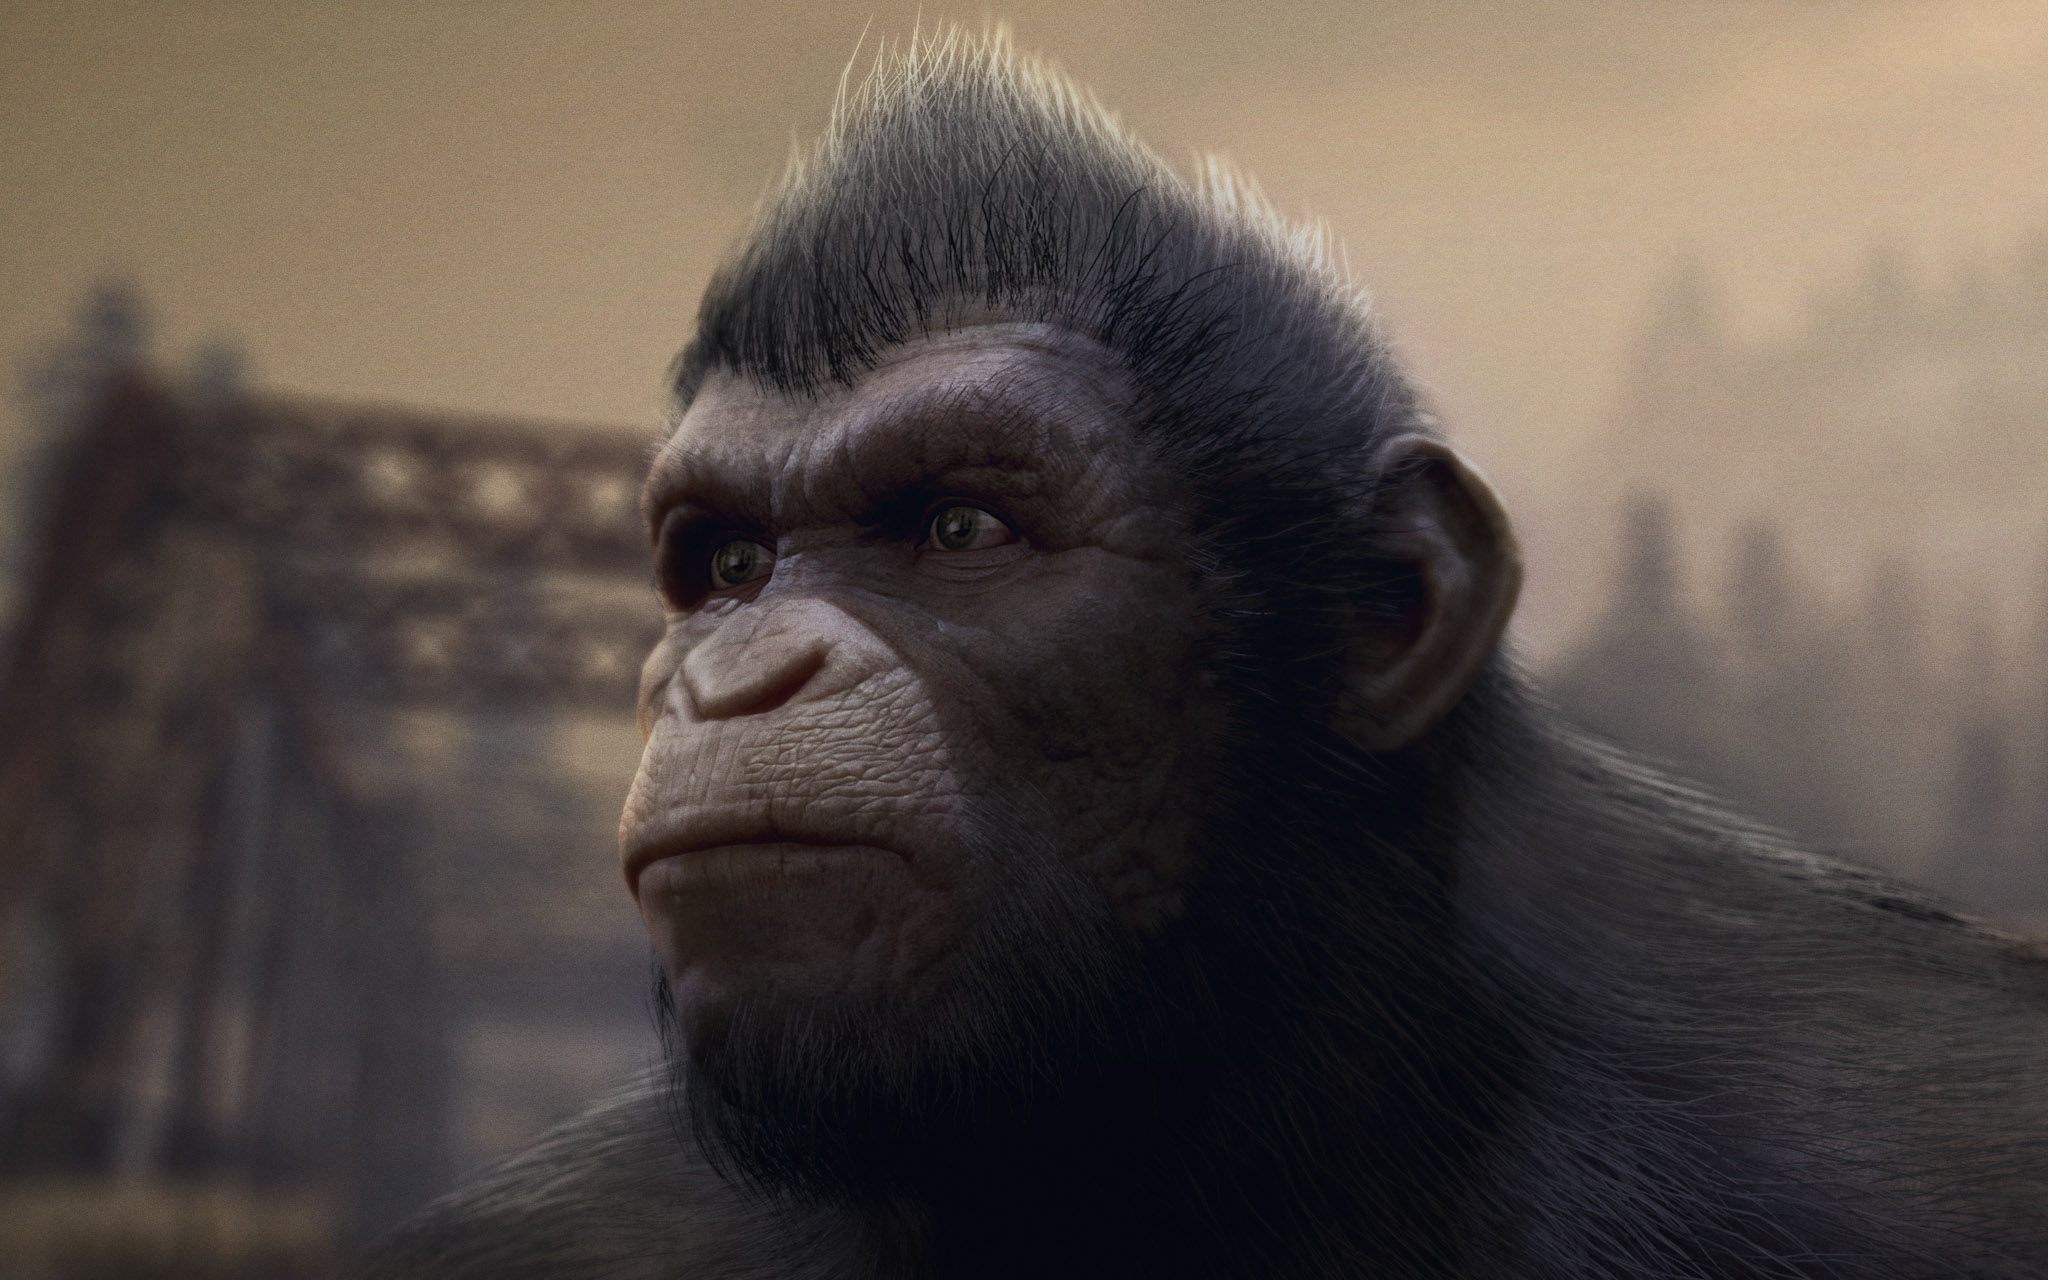 Media asset in full size related to 3dfxzone.it news item entitled as follows: 17 minuti di gameplay nel nuovo trailer di Planet of the Apes: Last Frontier | Image Name: news27288_Planet-of-the-Apes-Last-Frontier_4.jpg